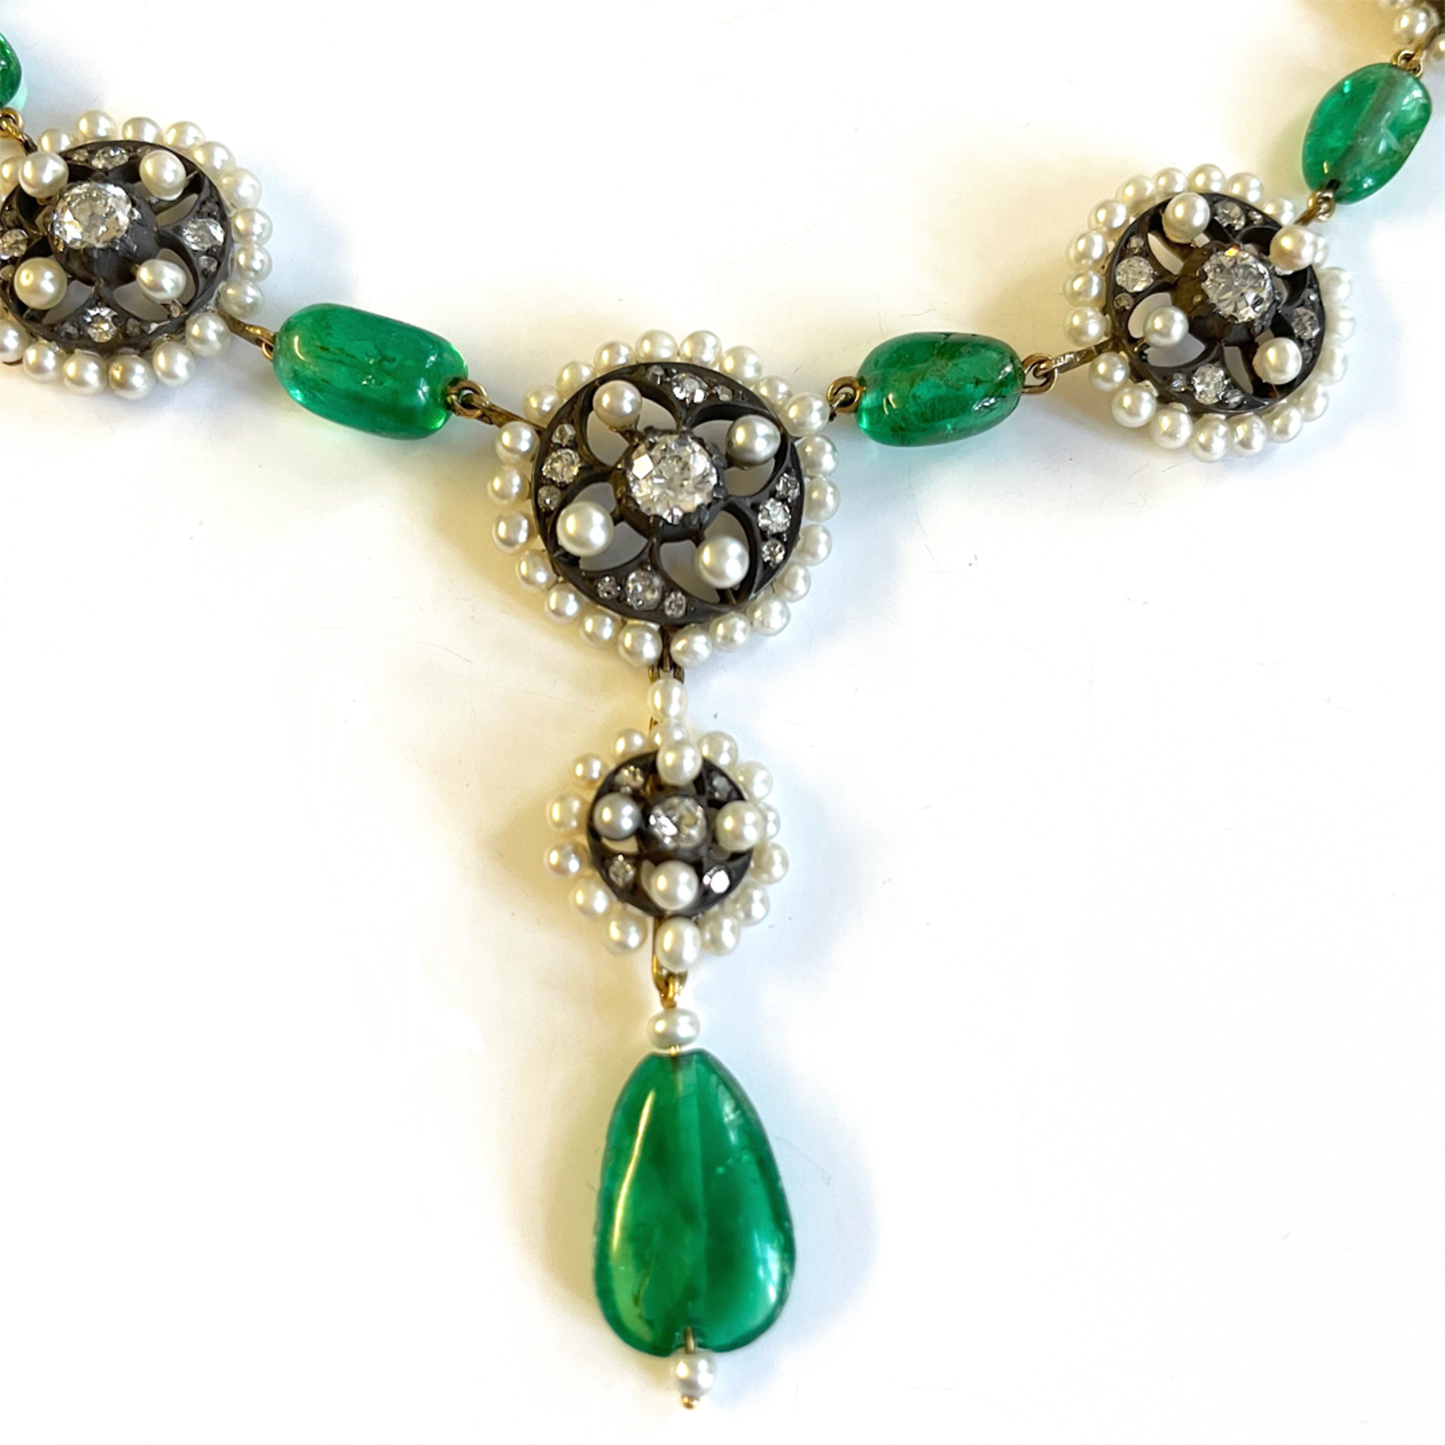 Victorian Silver & 18KT Yellow Gold Emerald, Diamond & Natural Pearl Necklace front close-up details